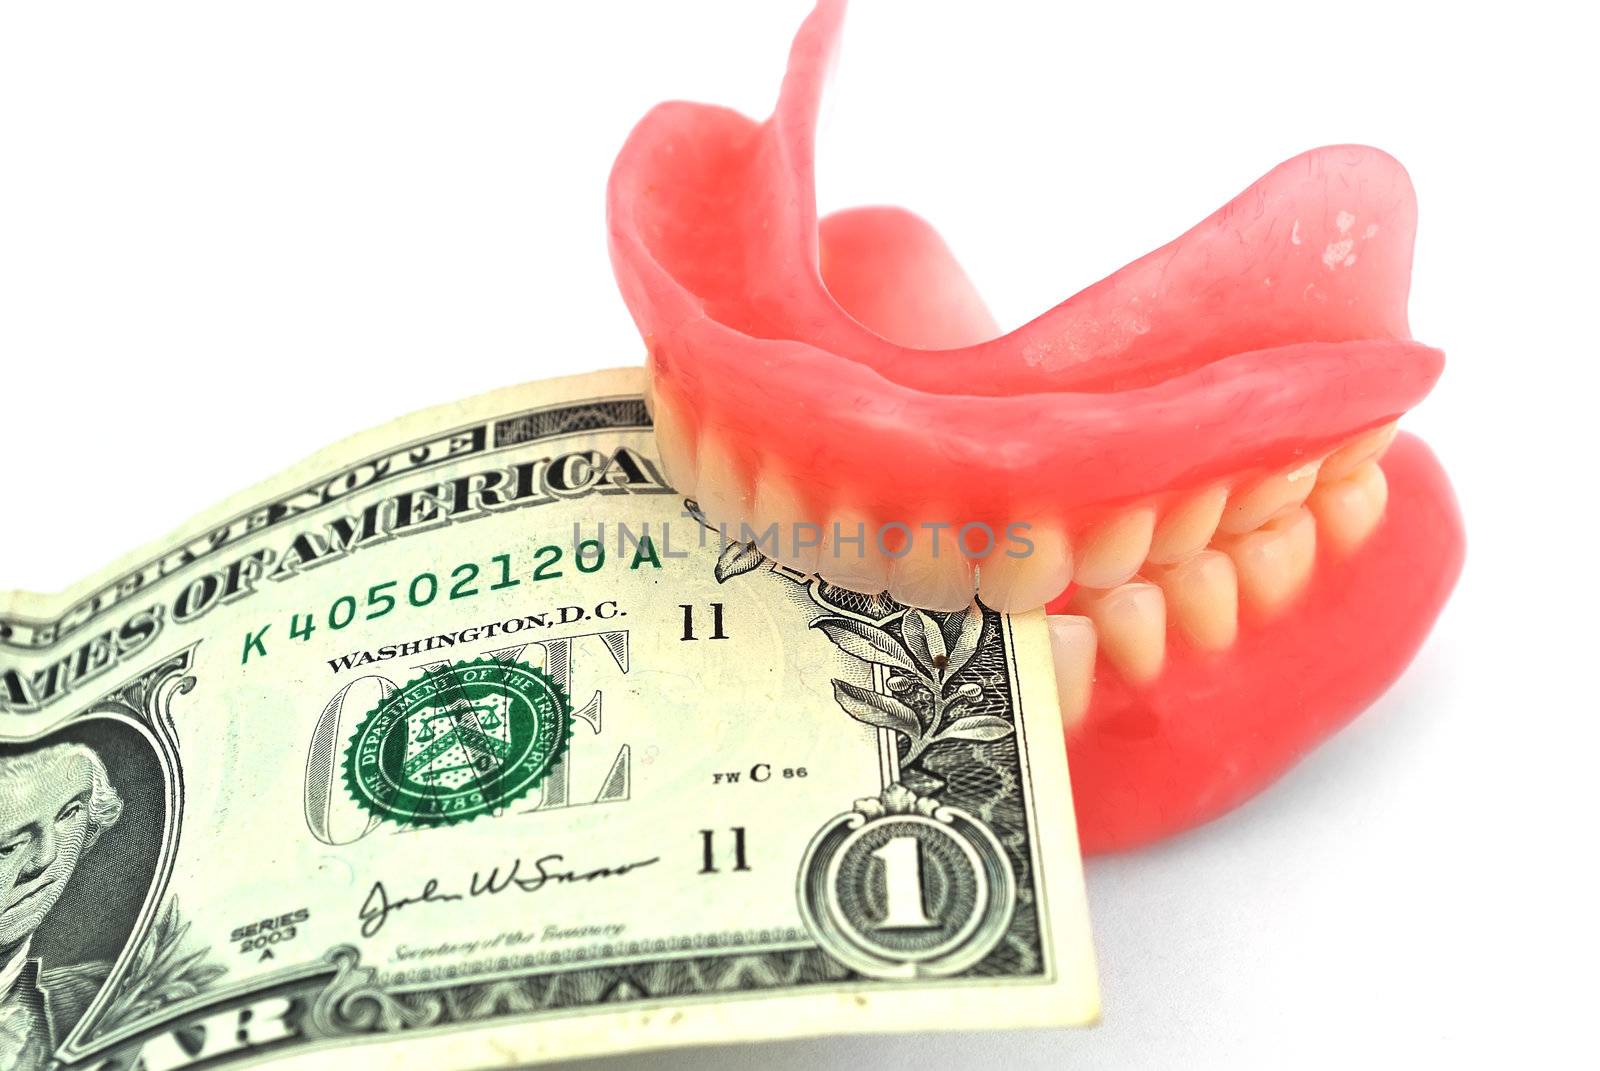 Plastic dentures and dollar on a white background